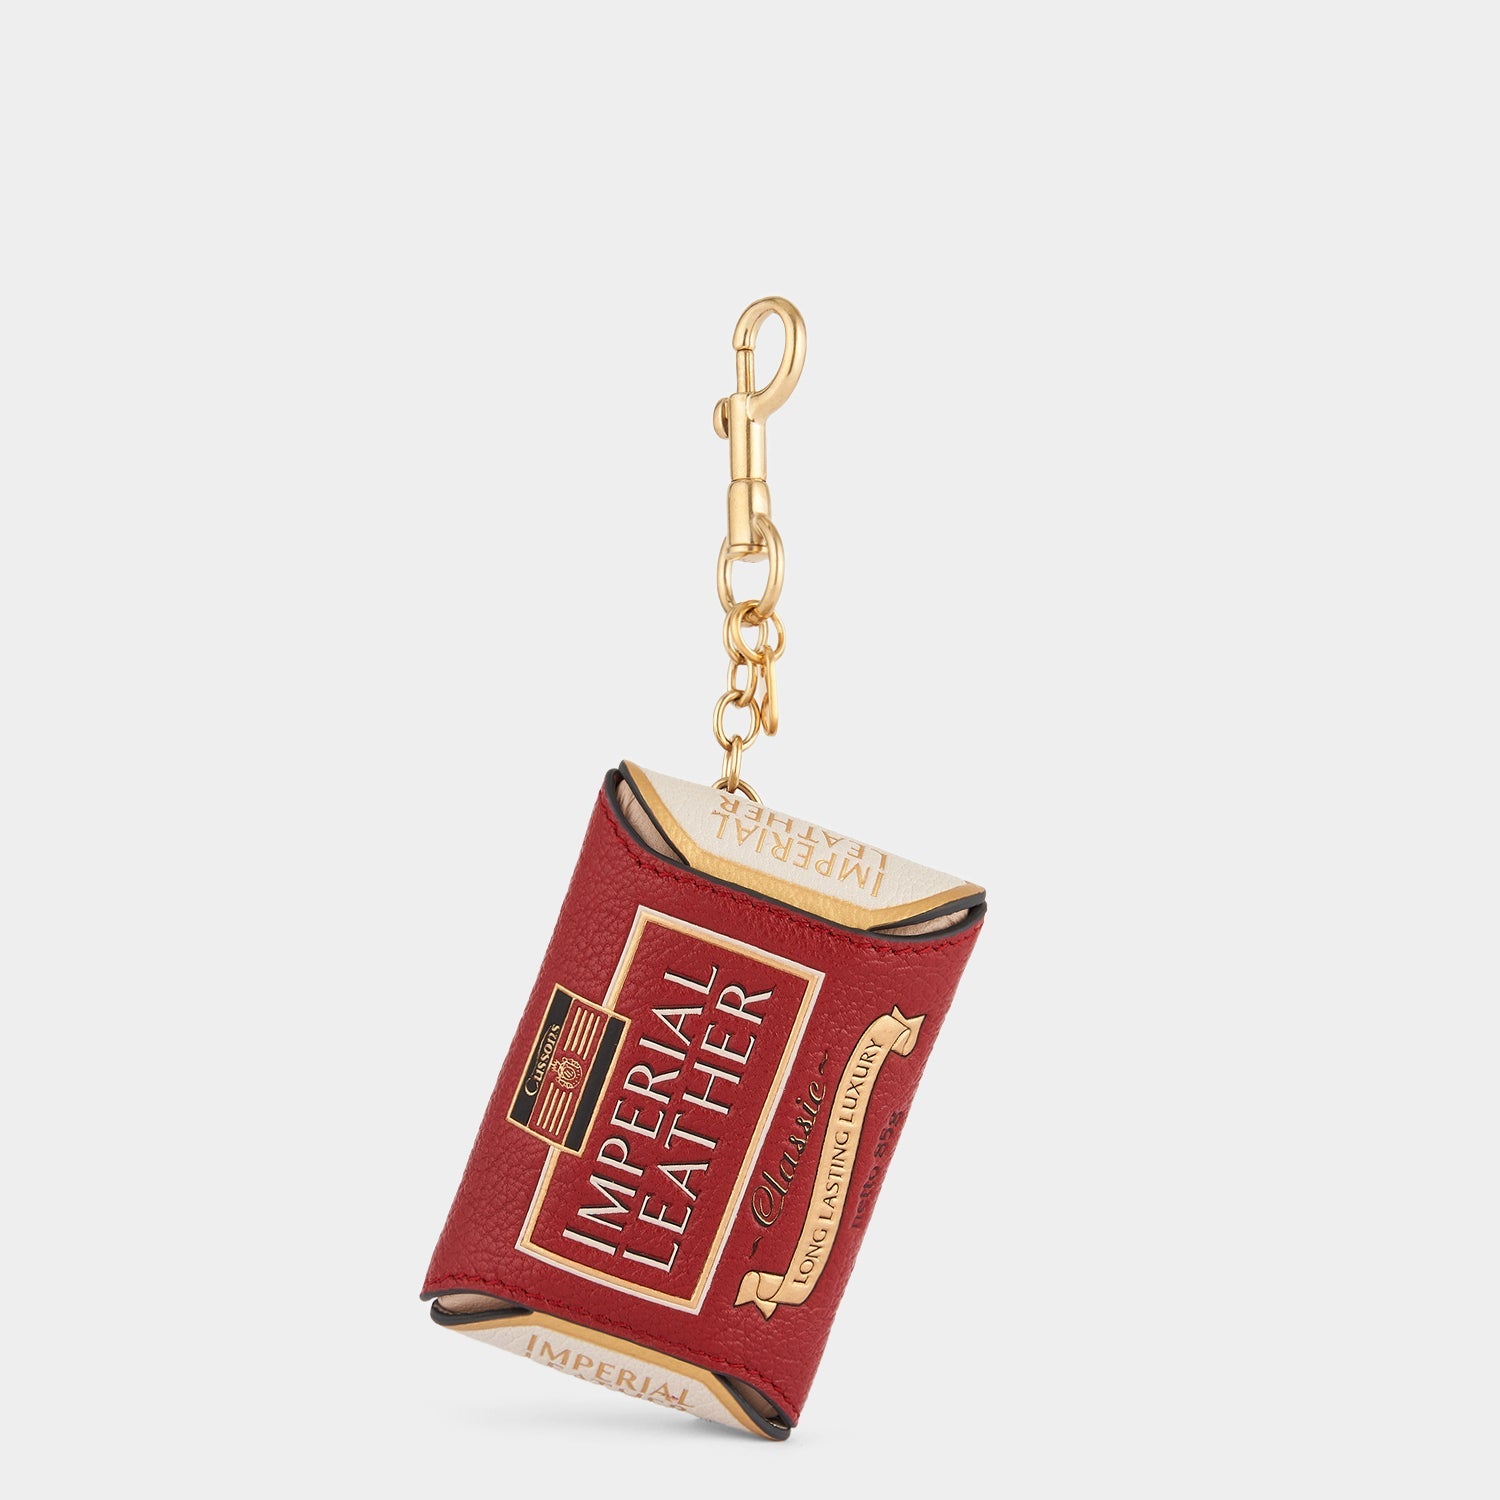 Anya Brands Imperial Leather Charm -

                  
                    Capra in Red -
                  

                  Anya Hindmarch US
